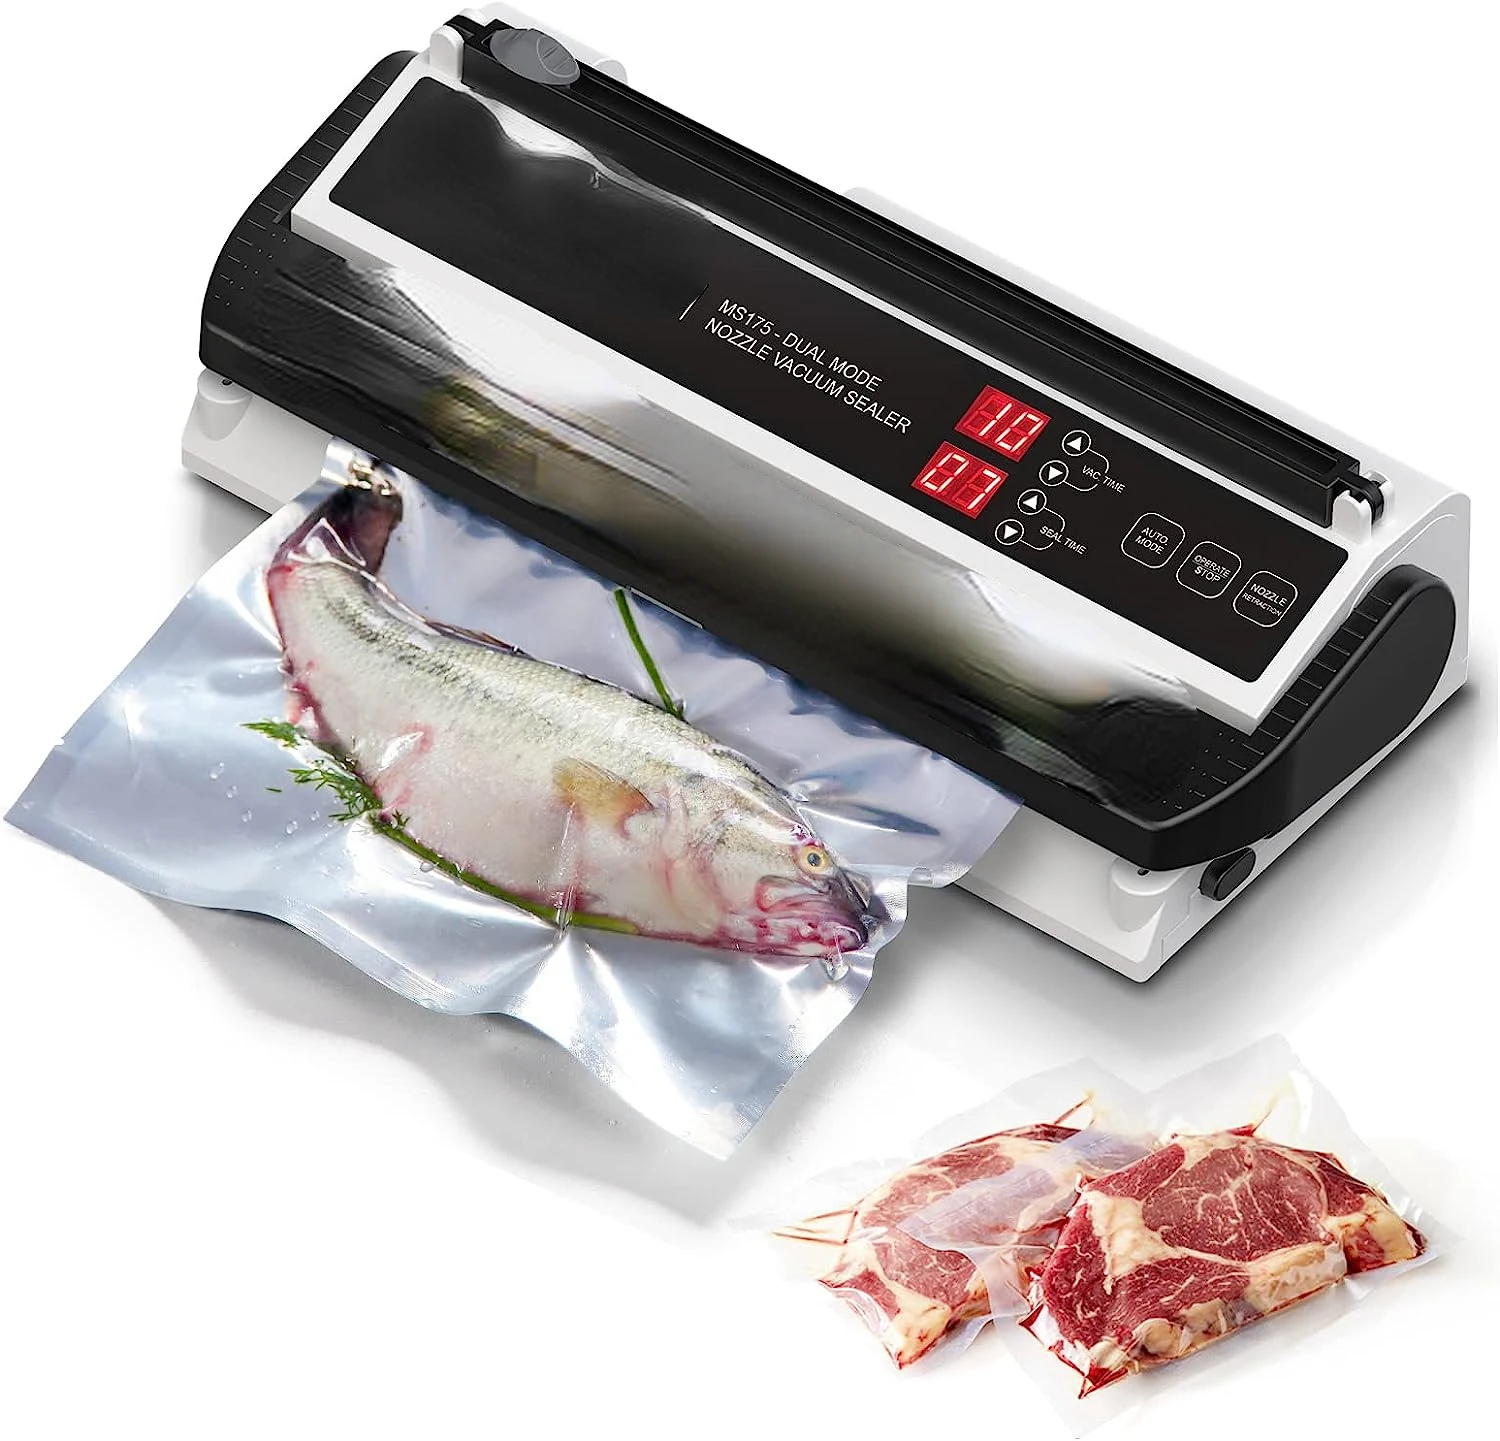 Vacuum Sealer Machine for Food Preservation, Nozzle Type, Compatible with Mylar Bags, Extra-Wide 8 mm Sealing , Adjustable Vacuu